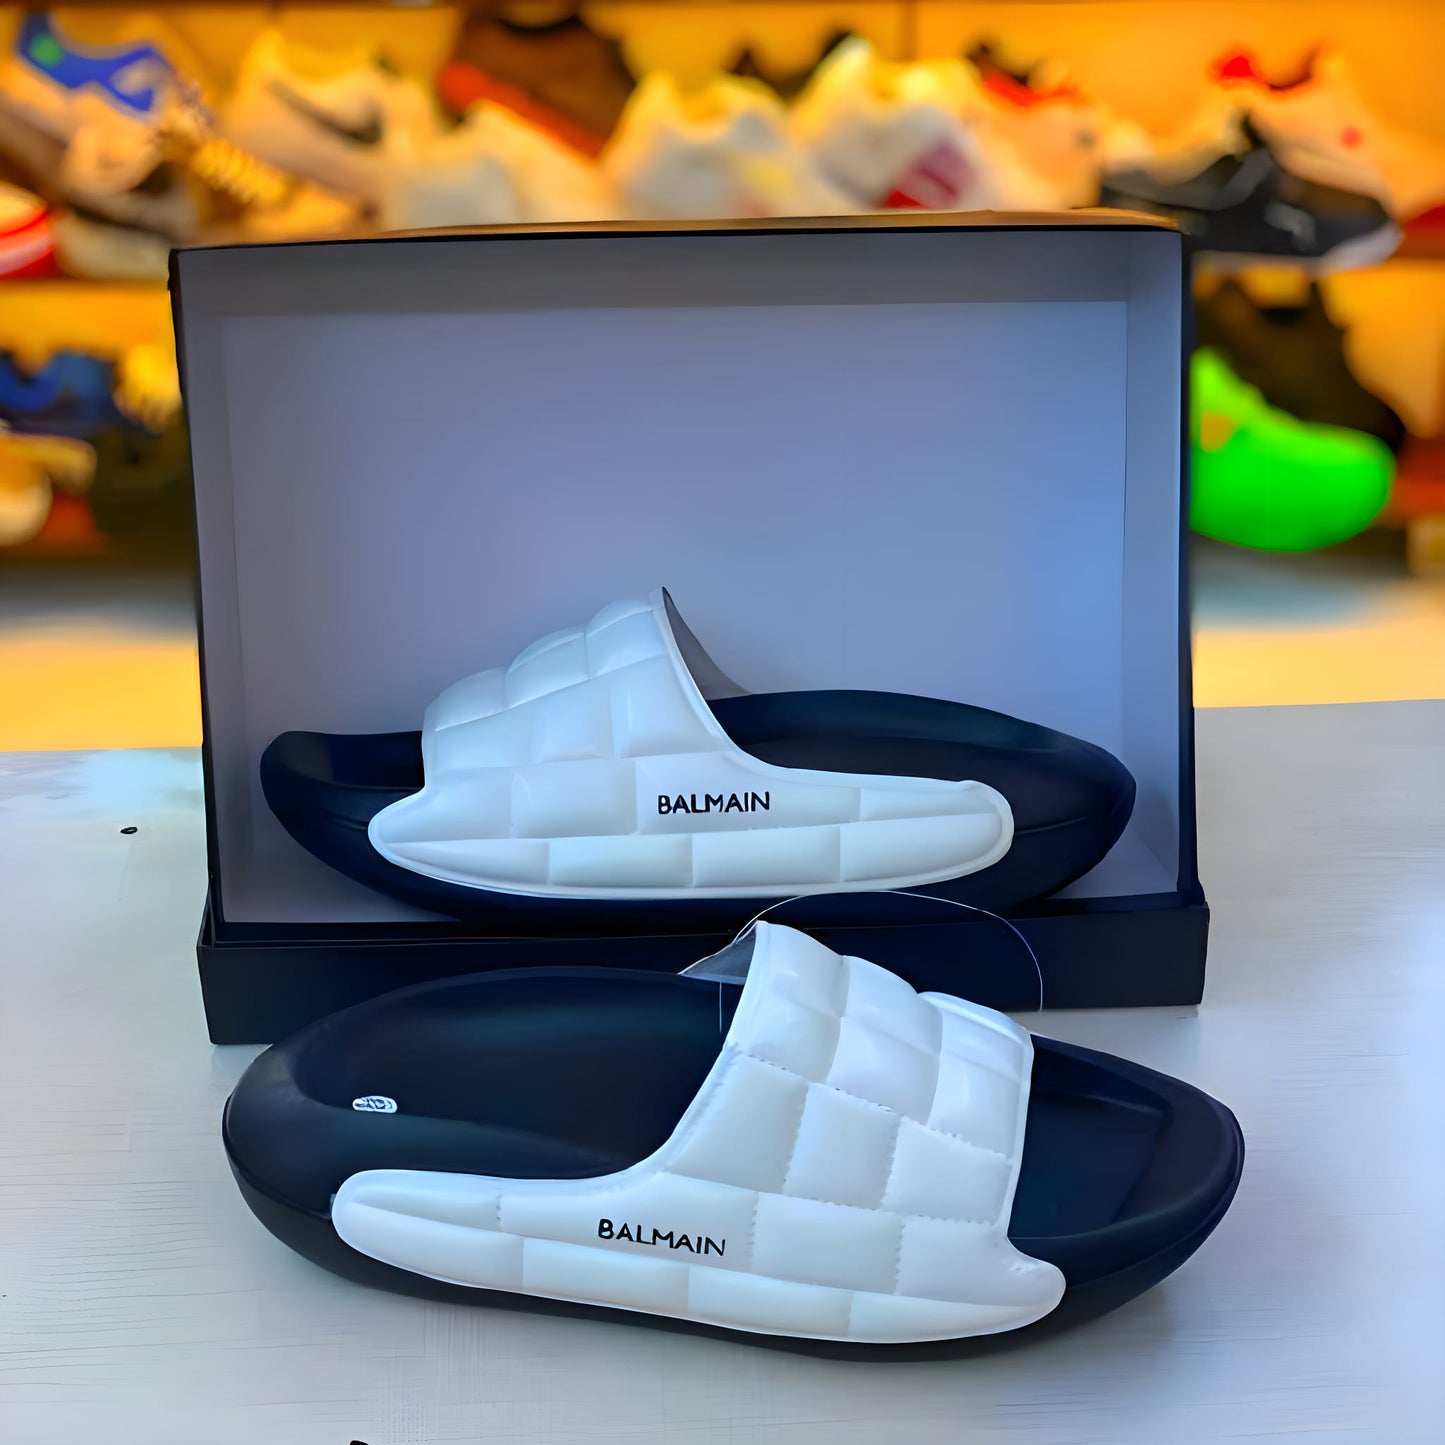 Imported white over black slippers